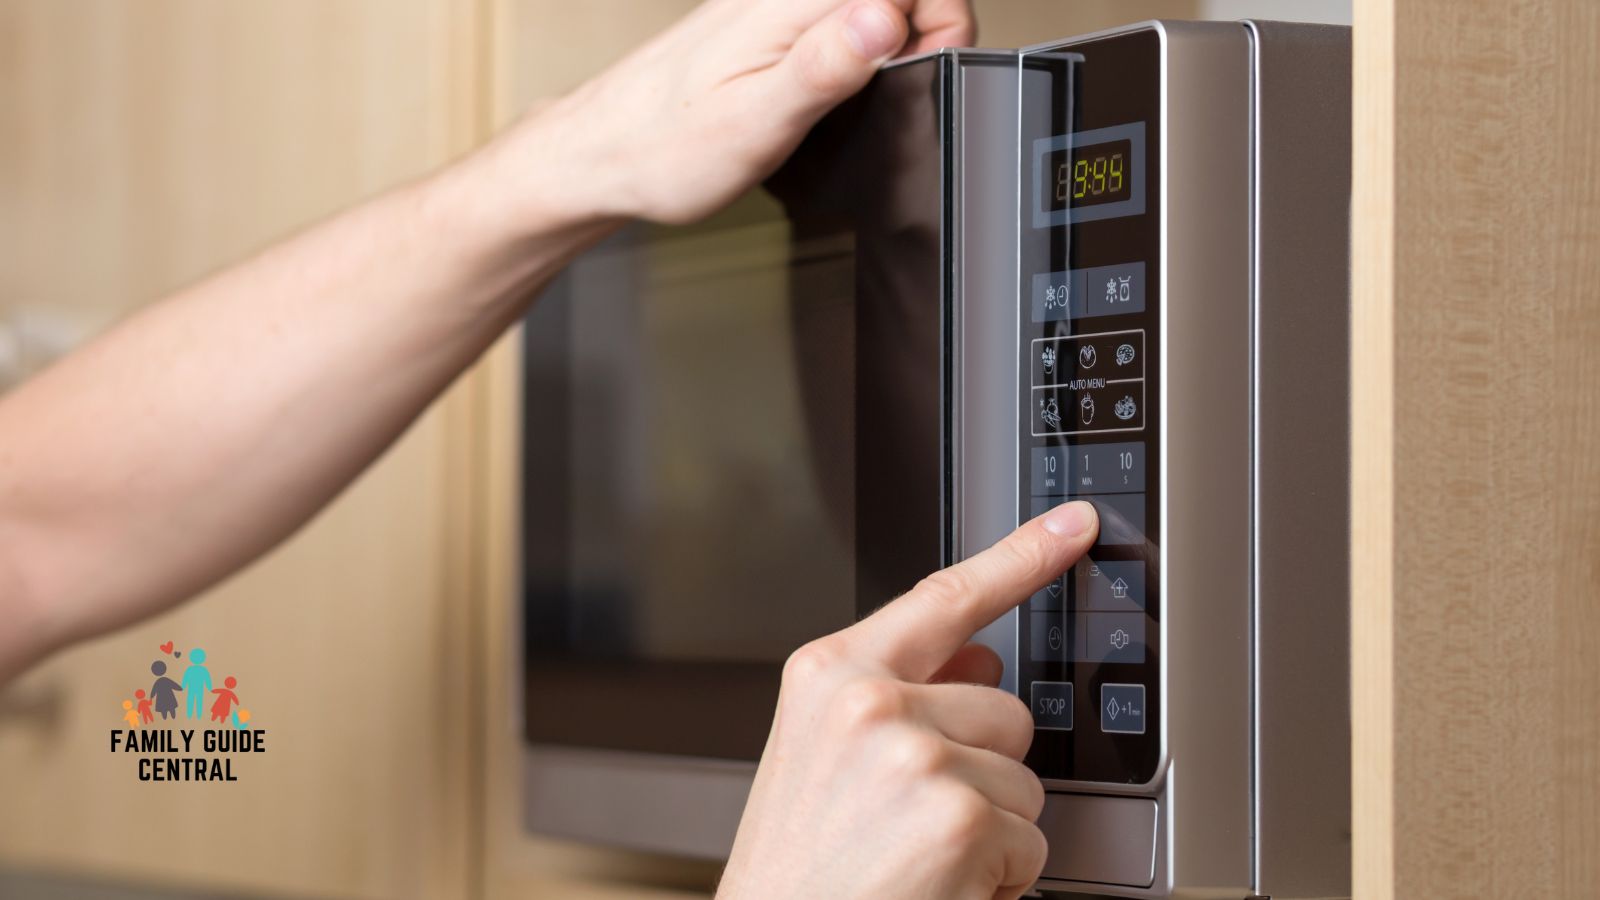 Using microwave pressing buttons - familyguidecentral.com